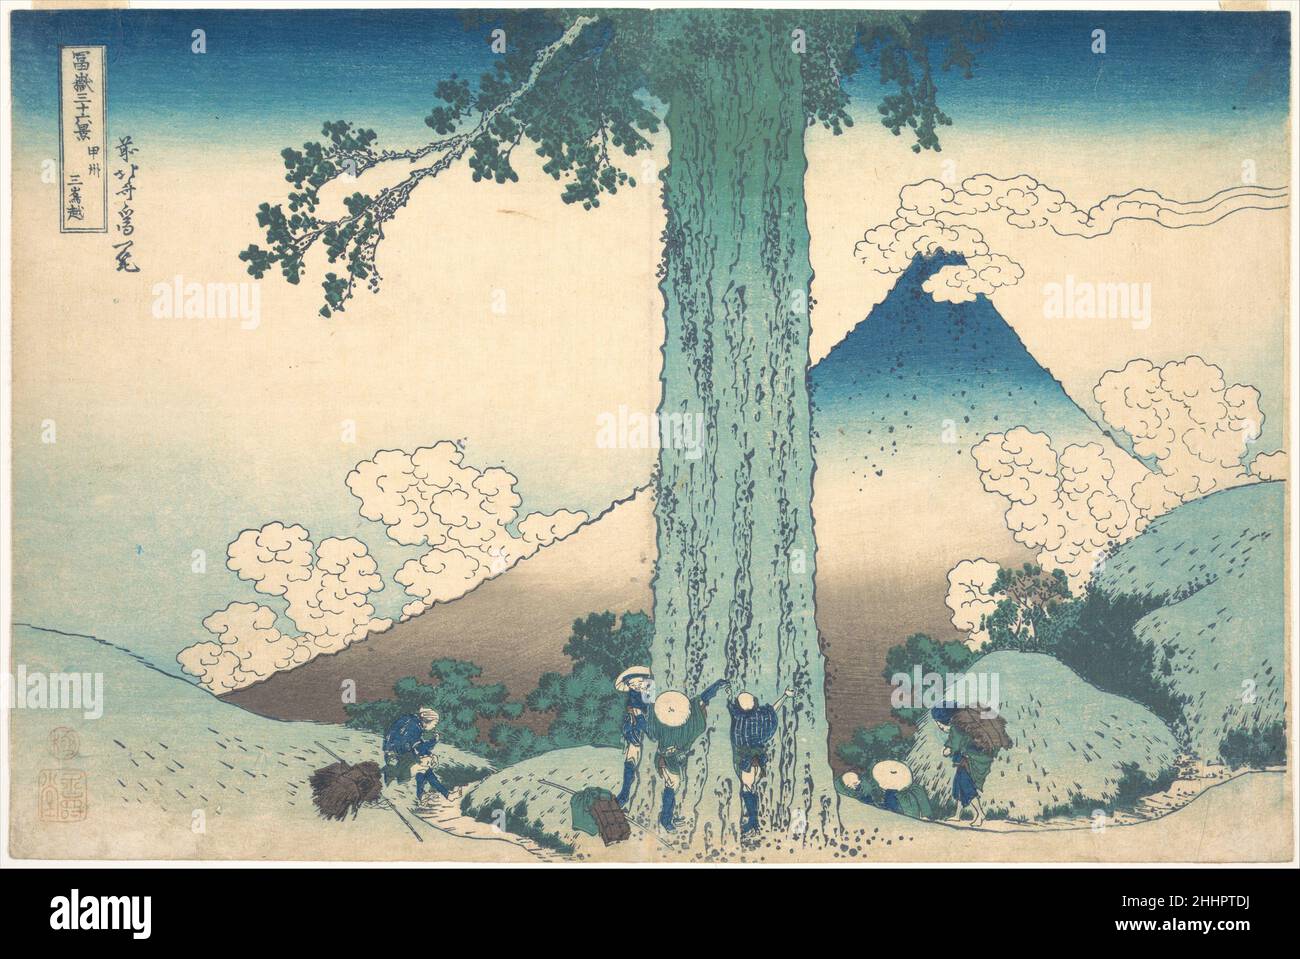 Mishima Pass in Kai Province (Kōshū Mishima goe), from the series Thirty-six Views of Mount Fuji (Fugaku sanjūrokkei) ca. 1830–32 Katsushika Hokusai Japanese Expressing their exuberance and triumph at having reached the site of the ancient cryptomeria tree, three travelers embrace its enormous trunk. The contrast of the small human figures with the enormous natural forms reveals Hokusai's empathy with the pilgrims.. Mishima Pass in Kai Province (Kōshū Mishima goe), from the series Thirty-six Views of Mount Fuji (Fugaku sanjūrokkei)  56786 Stock Photo